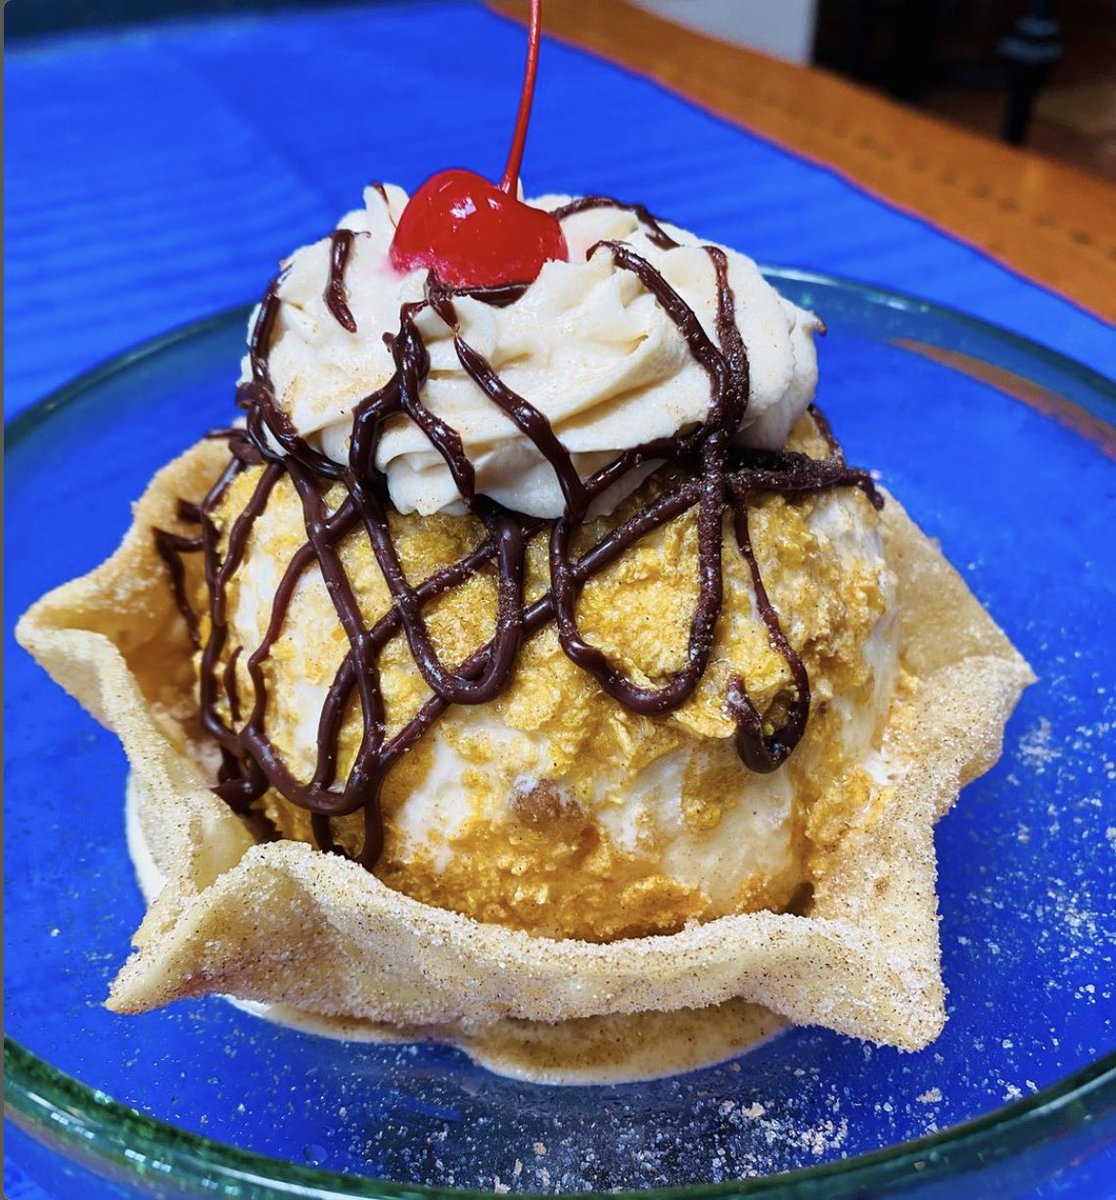 The famous Deep-Fried Ice Cream from  @Casadepico1 is the perfect weekday snack! 🤤🎉🍦
.
.
.
#CasadePico #GrossmontCenter #MexicanFood #LaMesa #supportlocalsd #SanDiego #sdliving #SanDiegoFood #youstayhungrySD #EatDrinkSD #SDFood #SDFoodie